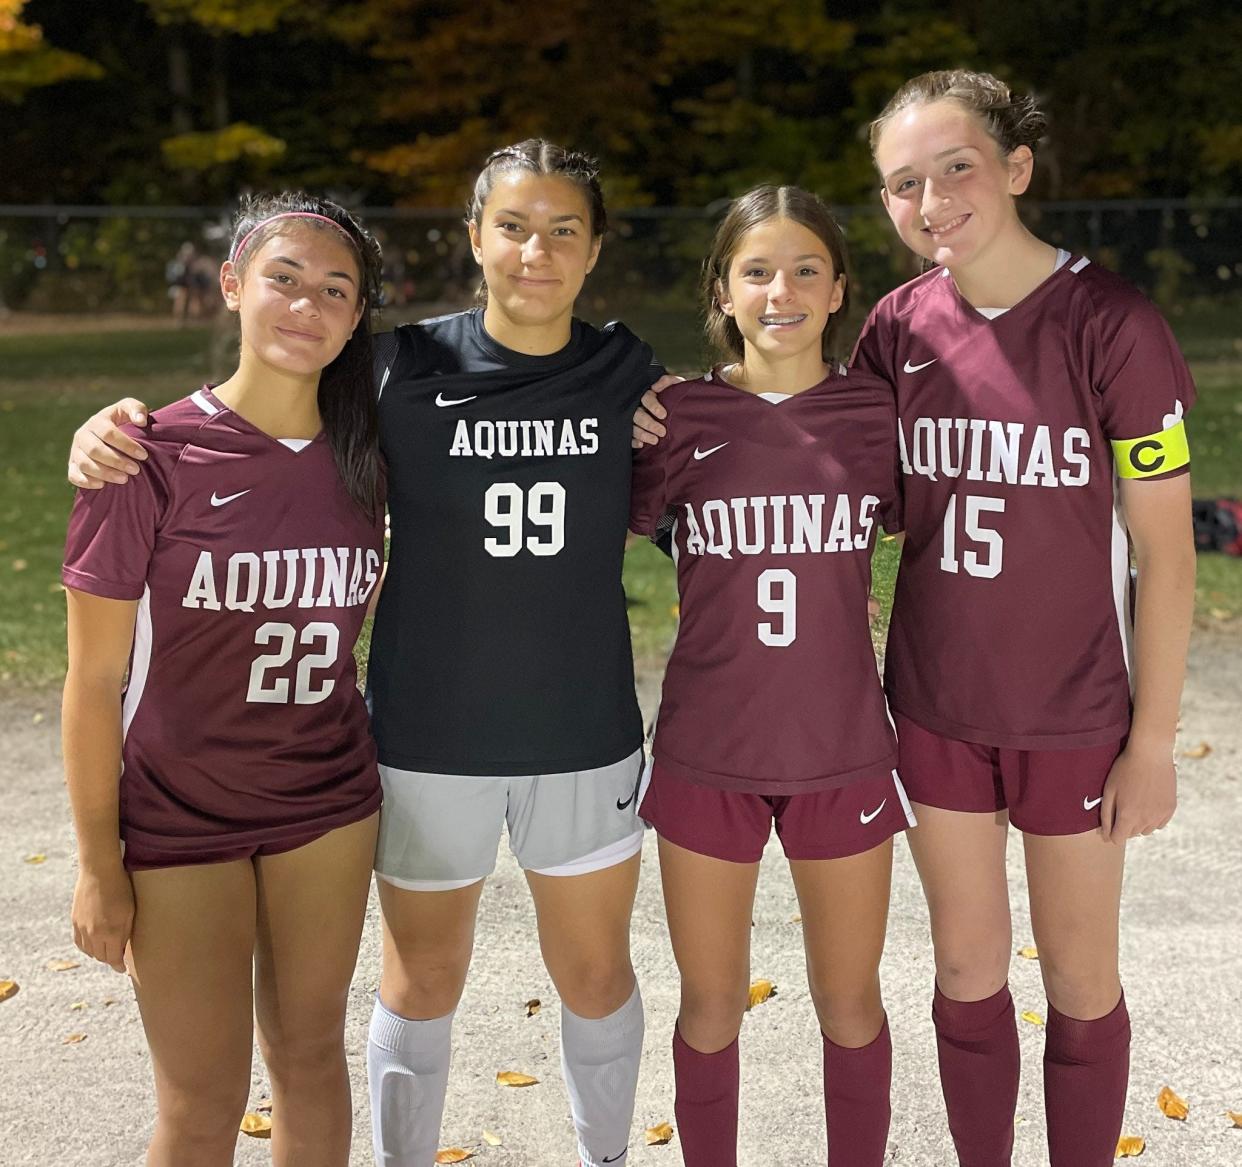 Aquinas' Juliana Sevio, goalkeeper Liz Tantalo, Sienna Fallone and Molly O'Toole after their 3-0 win over Greece Olympia in the Section V Class A semifinals Wednesday, Oct. 26 in Spencerport.